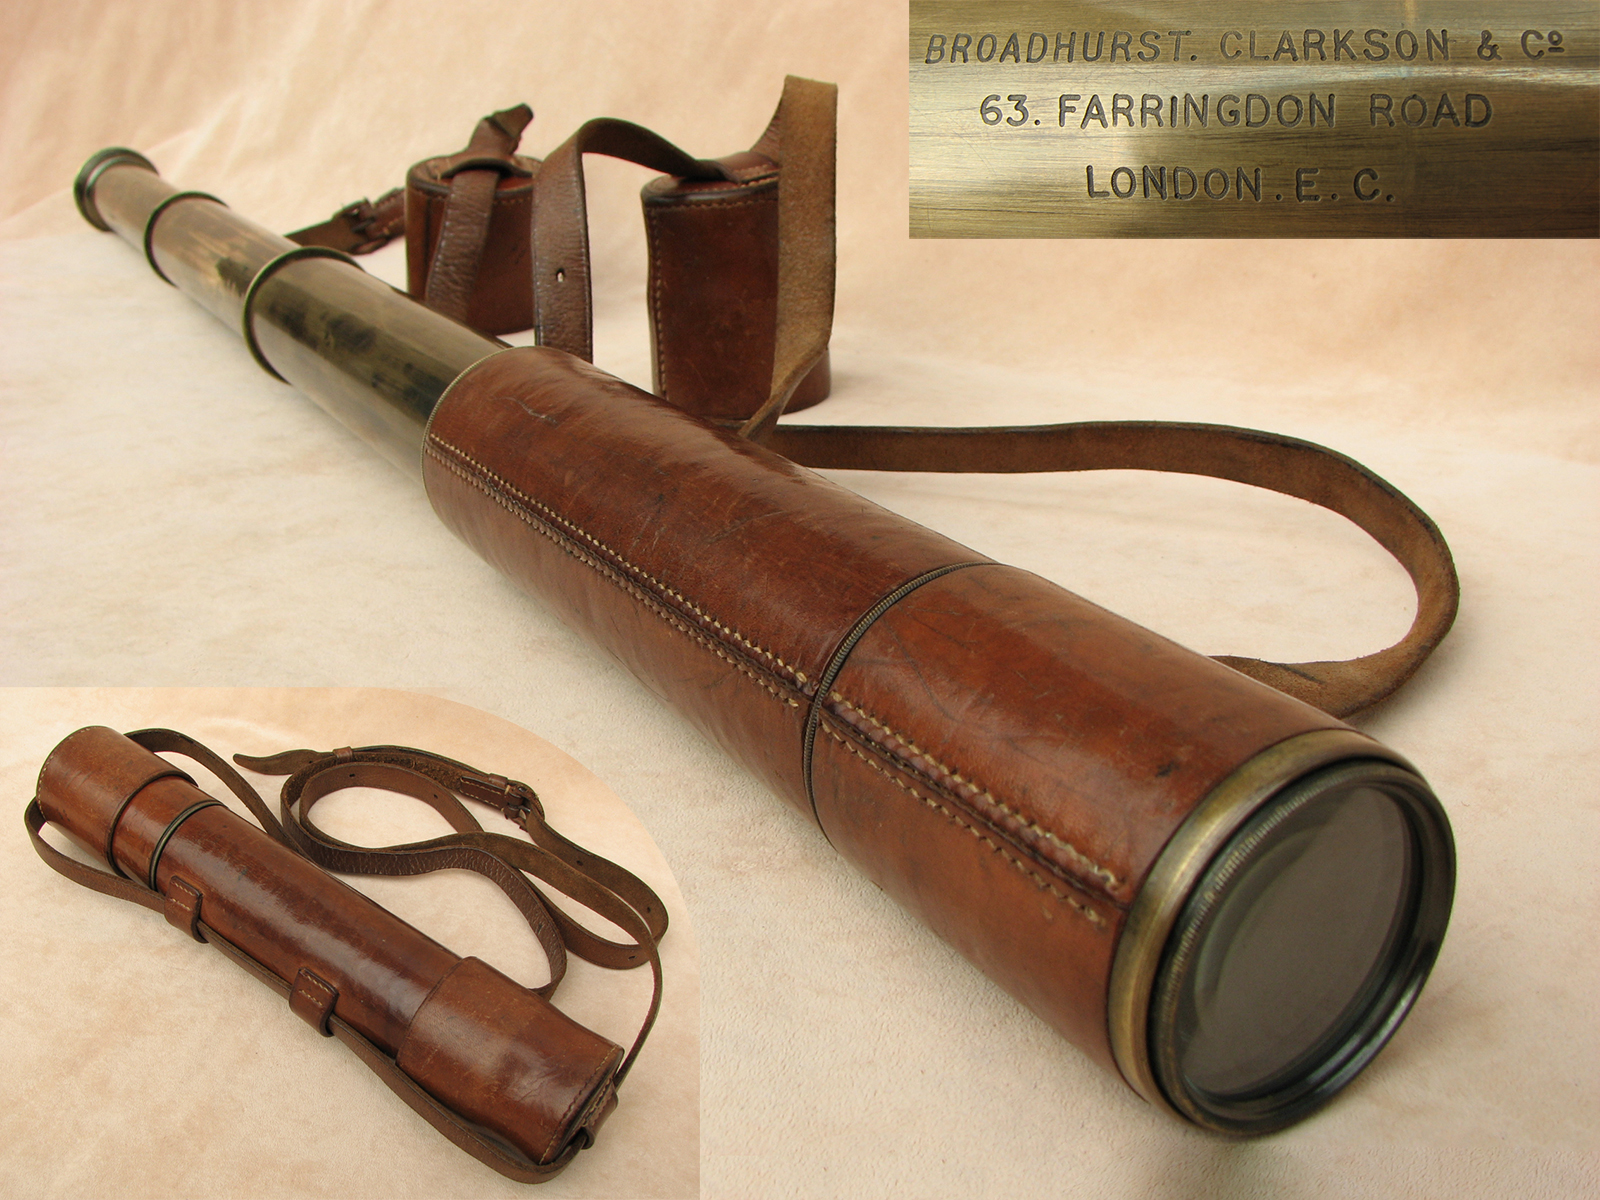 Powerful 25x-40x variable magnification field 'Tourist' telescope by Broadhurst Clarkson